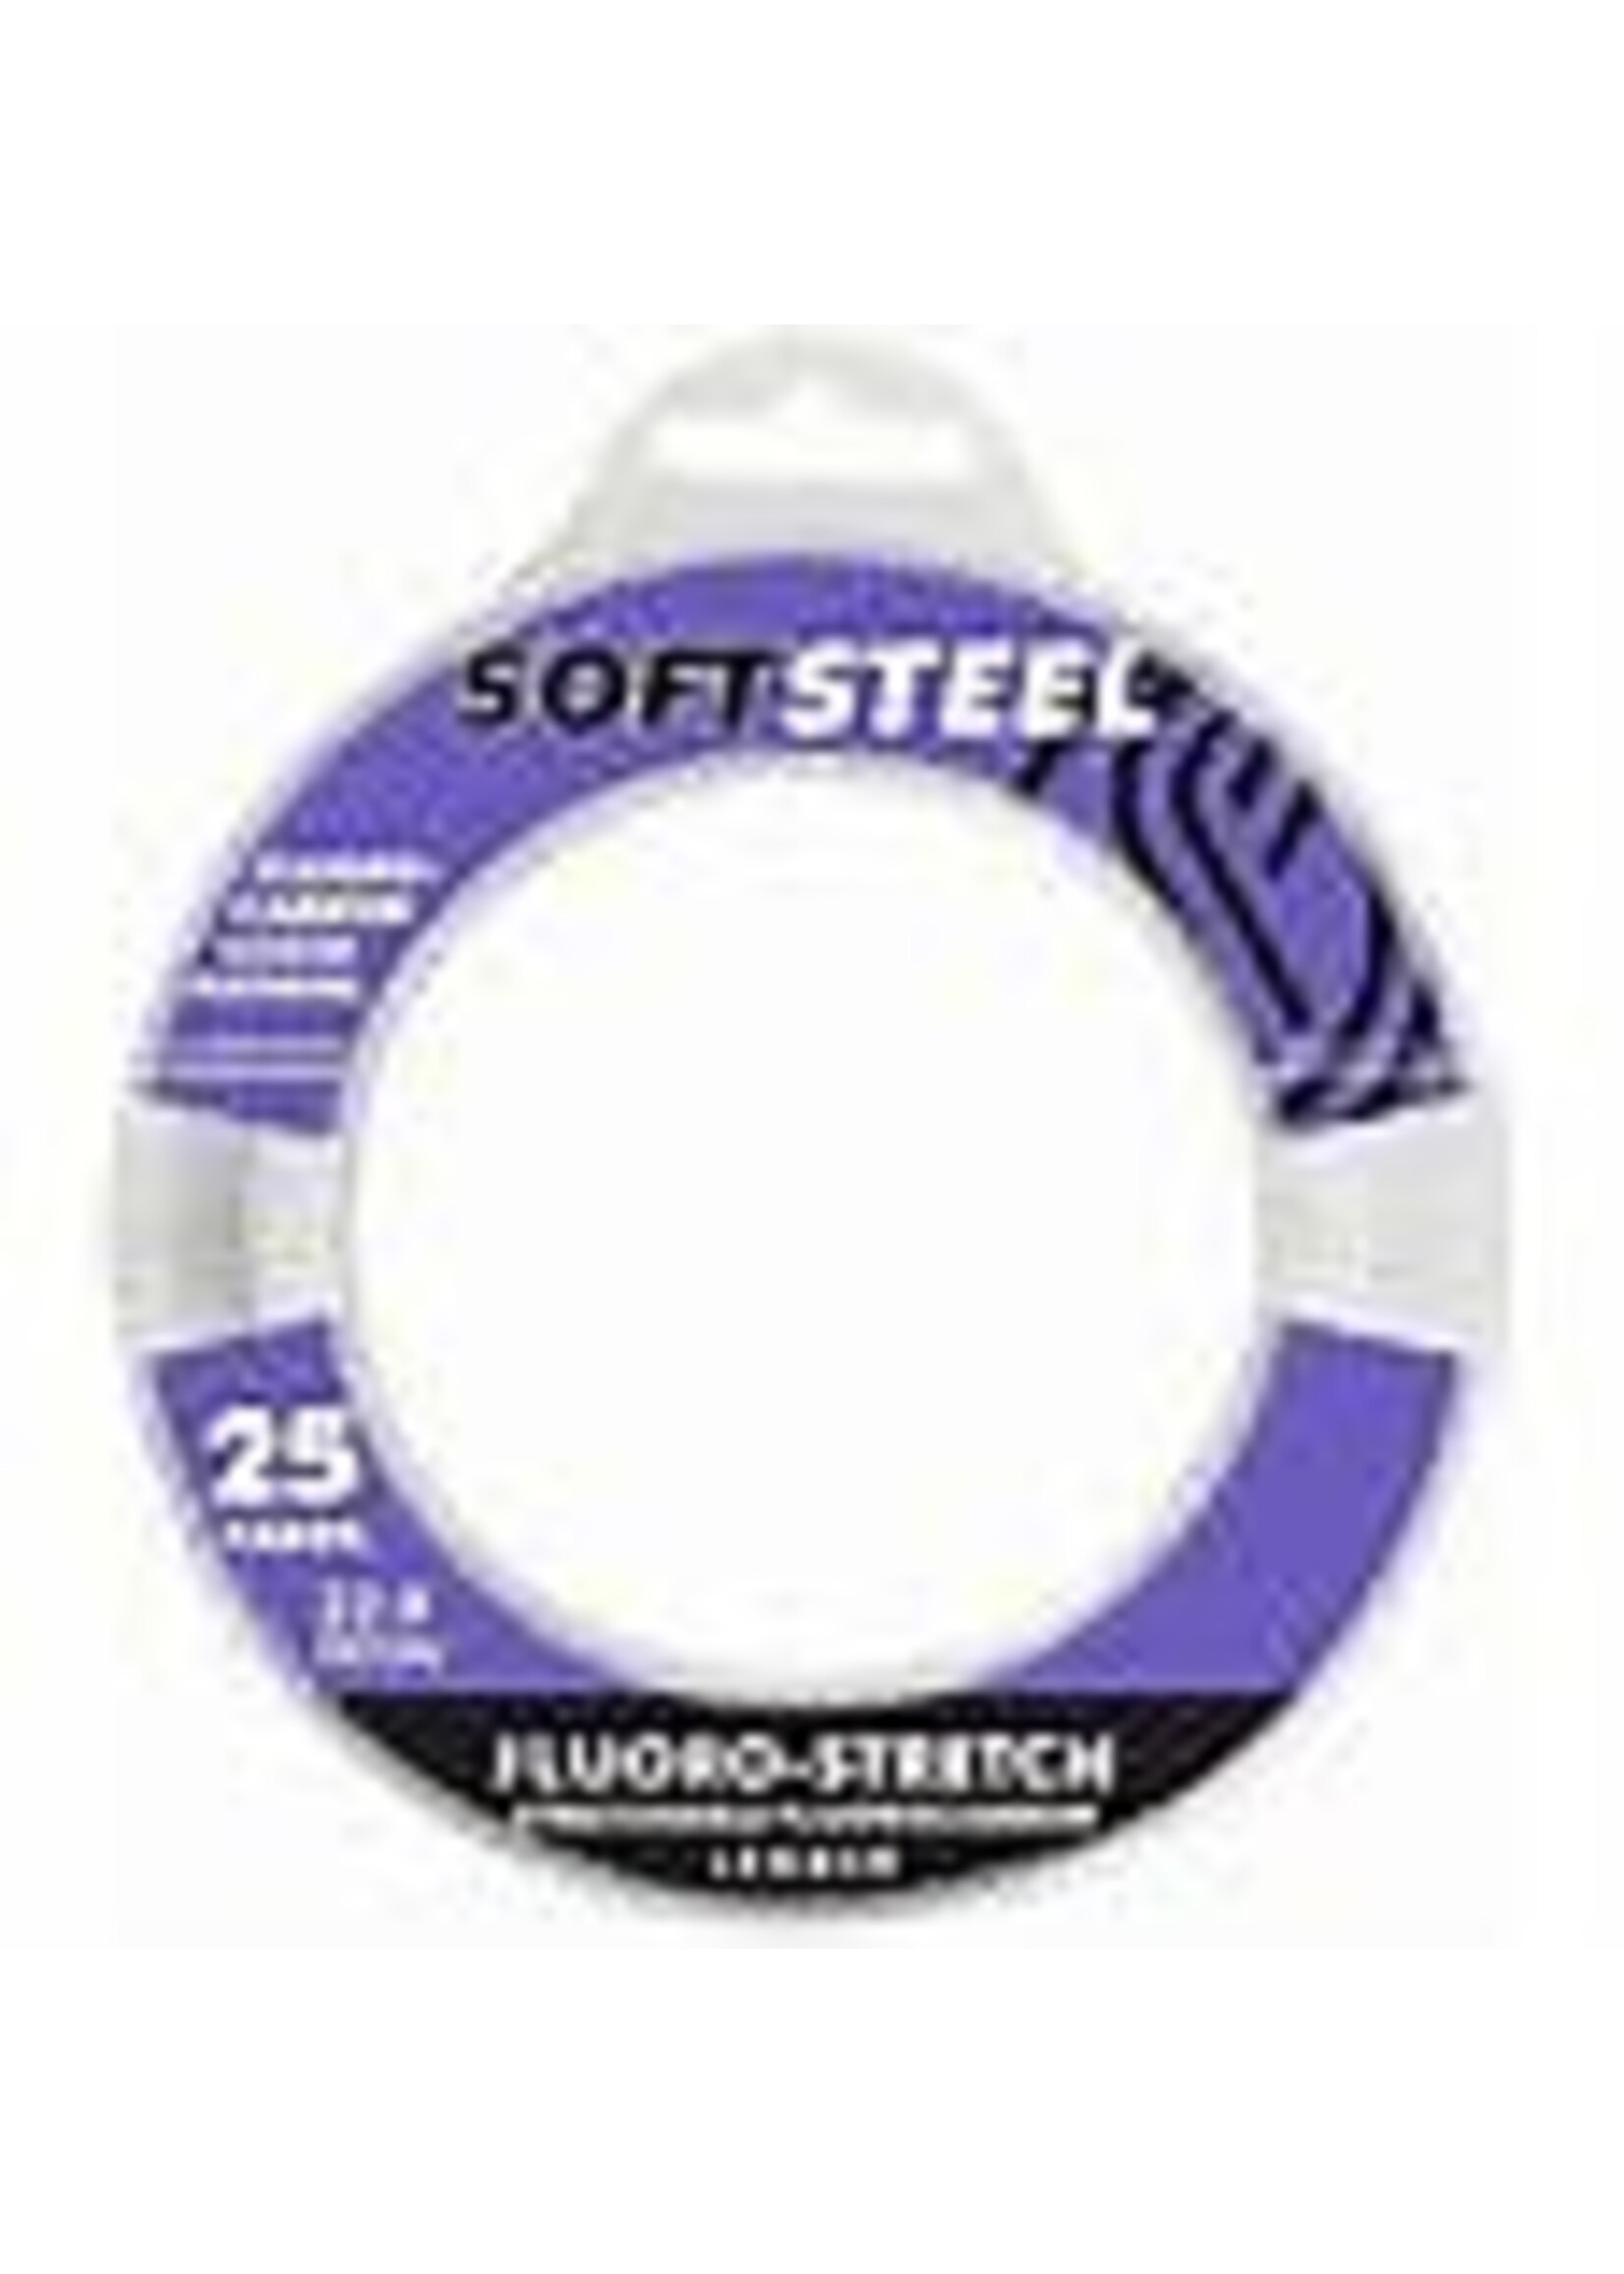 Soft Steel Soft Steel Fluoro-Stretch Leader Material 25yds